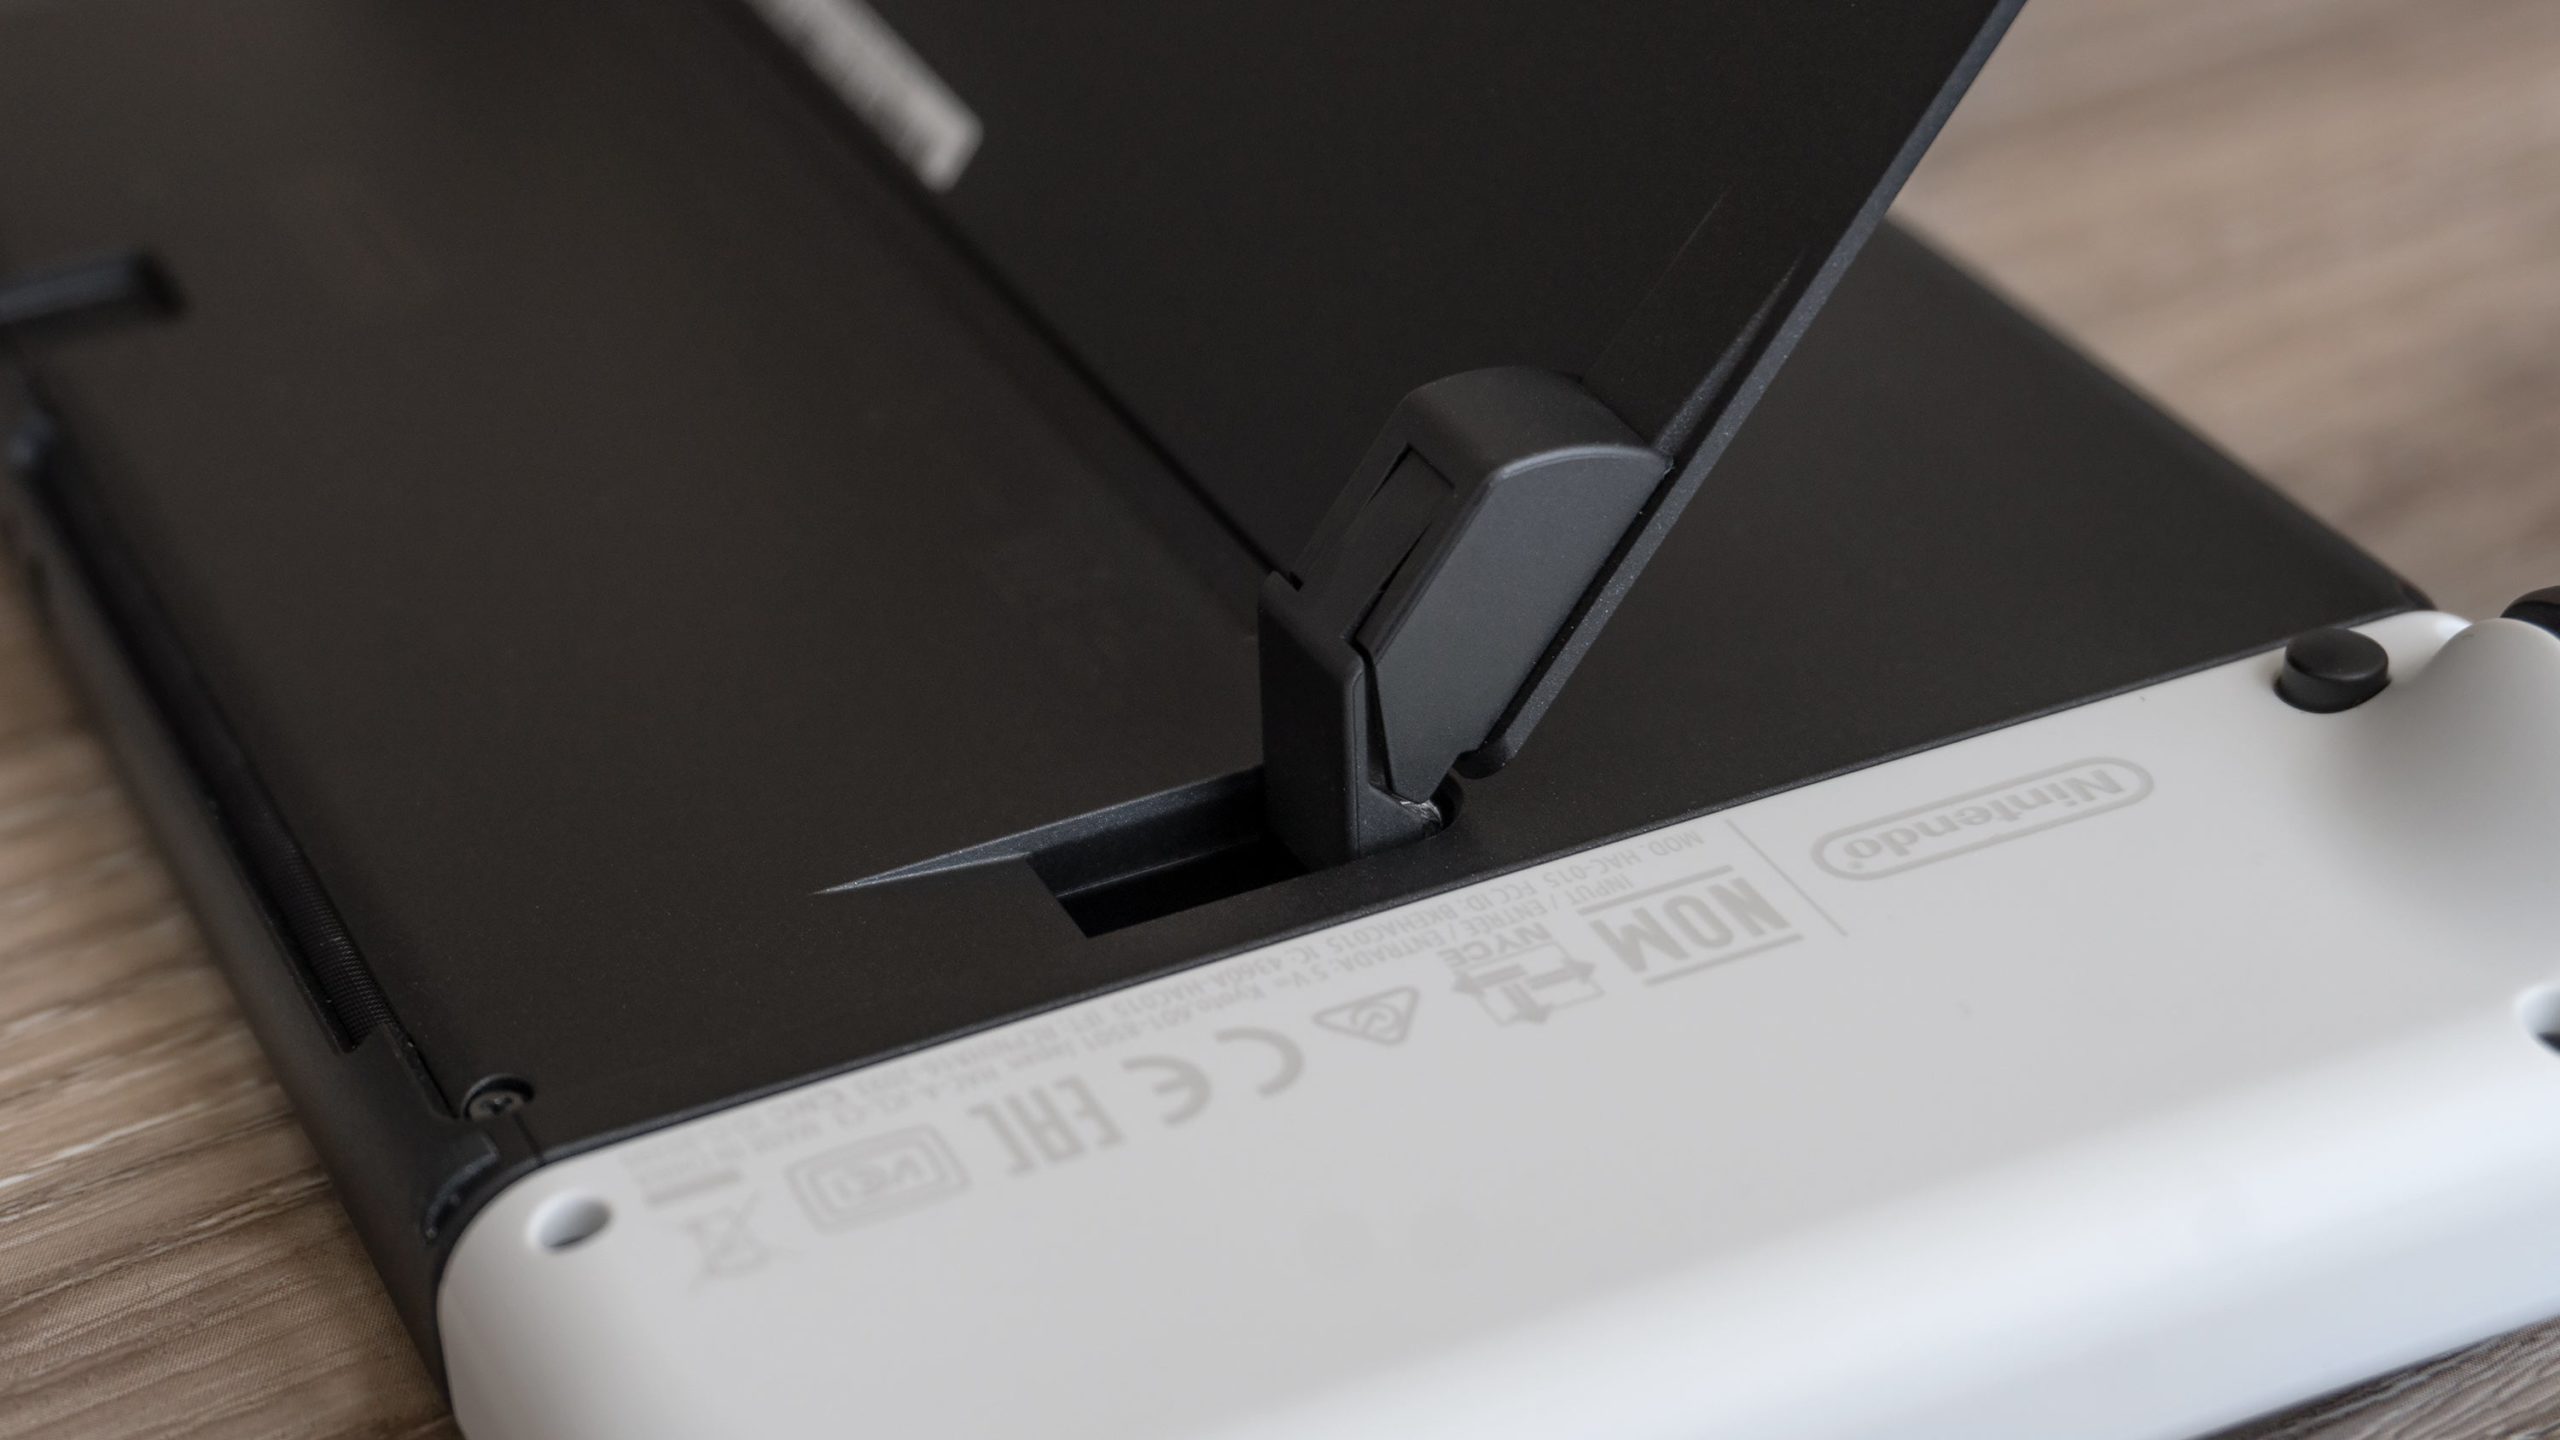 The kickstand on the new Switch OLED is as wide as the console and uses very sturdy adjustable hinges allowing the console to be propped up at any angle. (Photo: Andrew Liszewski - Gizmodo)